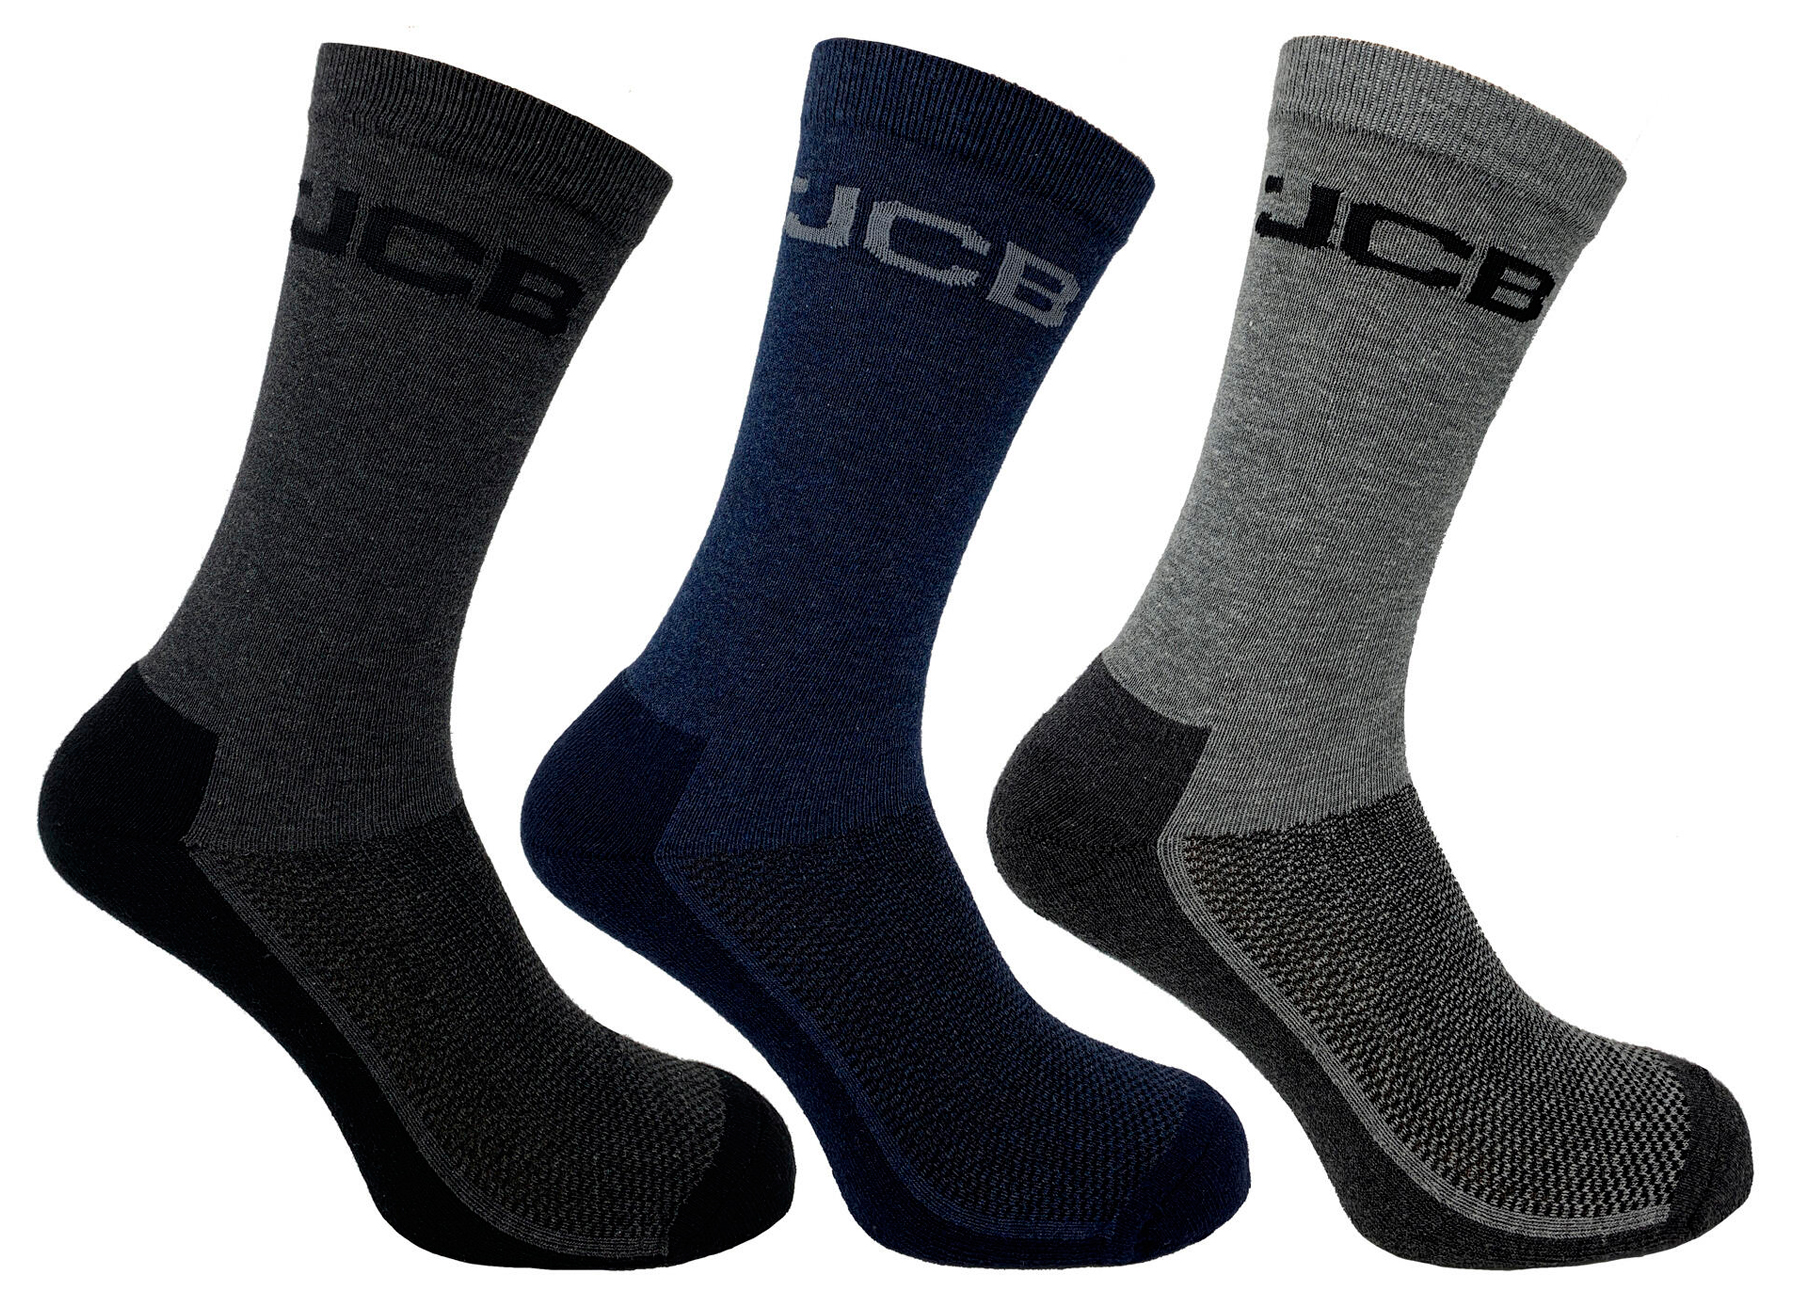 JCB CHAUSSETTES DE TRAVAIL EVERY DAY 3-PACK 44-47